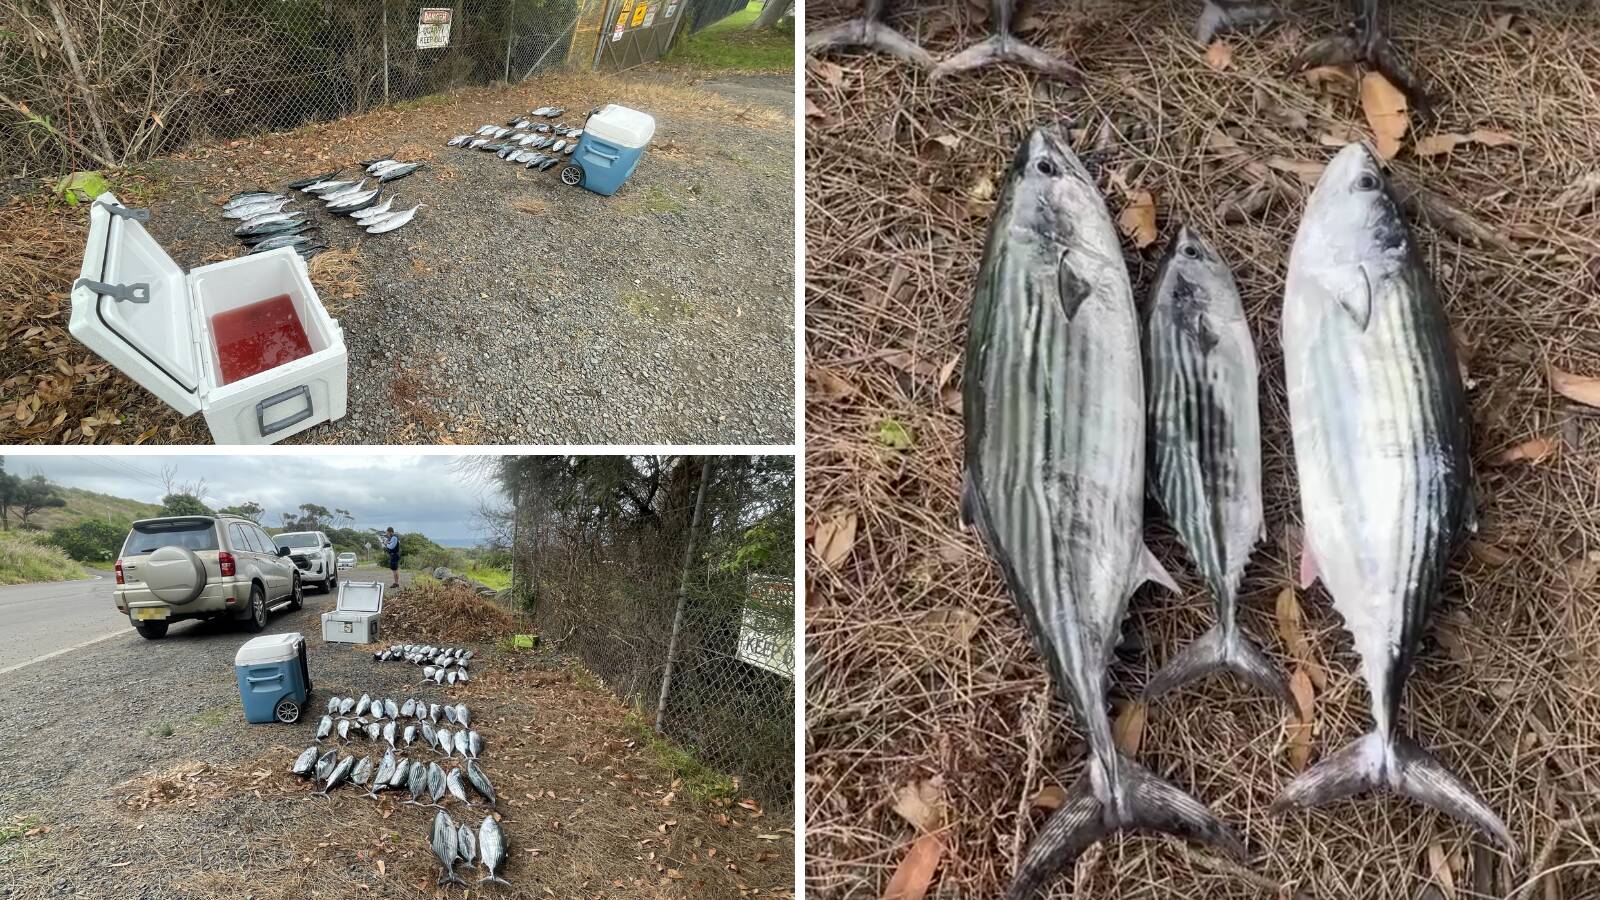 Apparent illegal catch exceeding bag limit detected at Bass Point, Illawarra Mercury